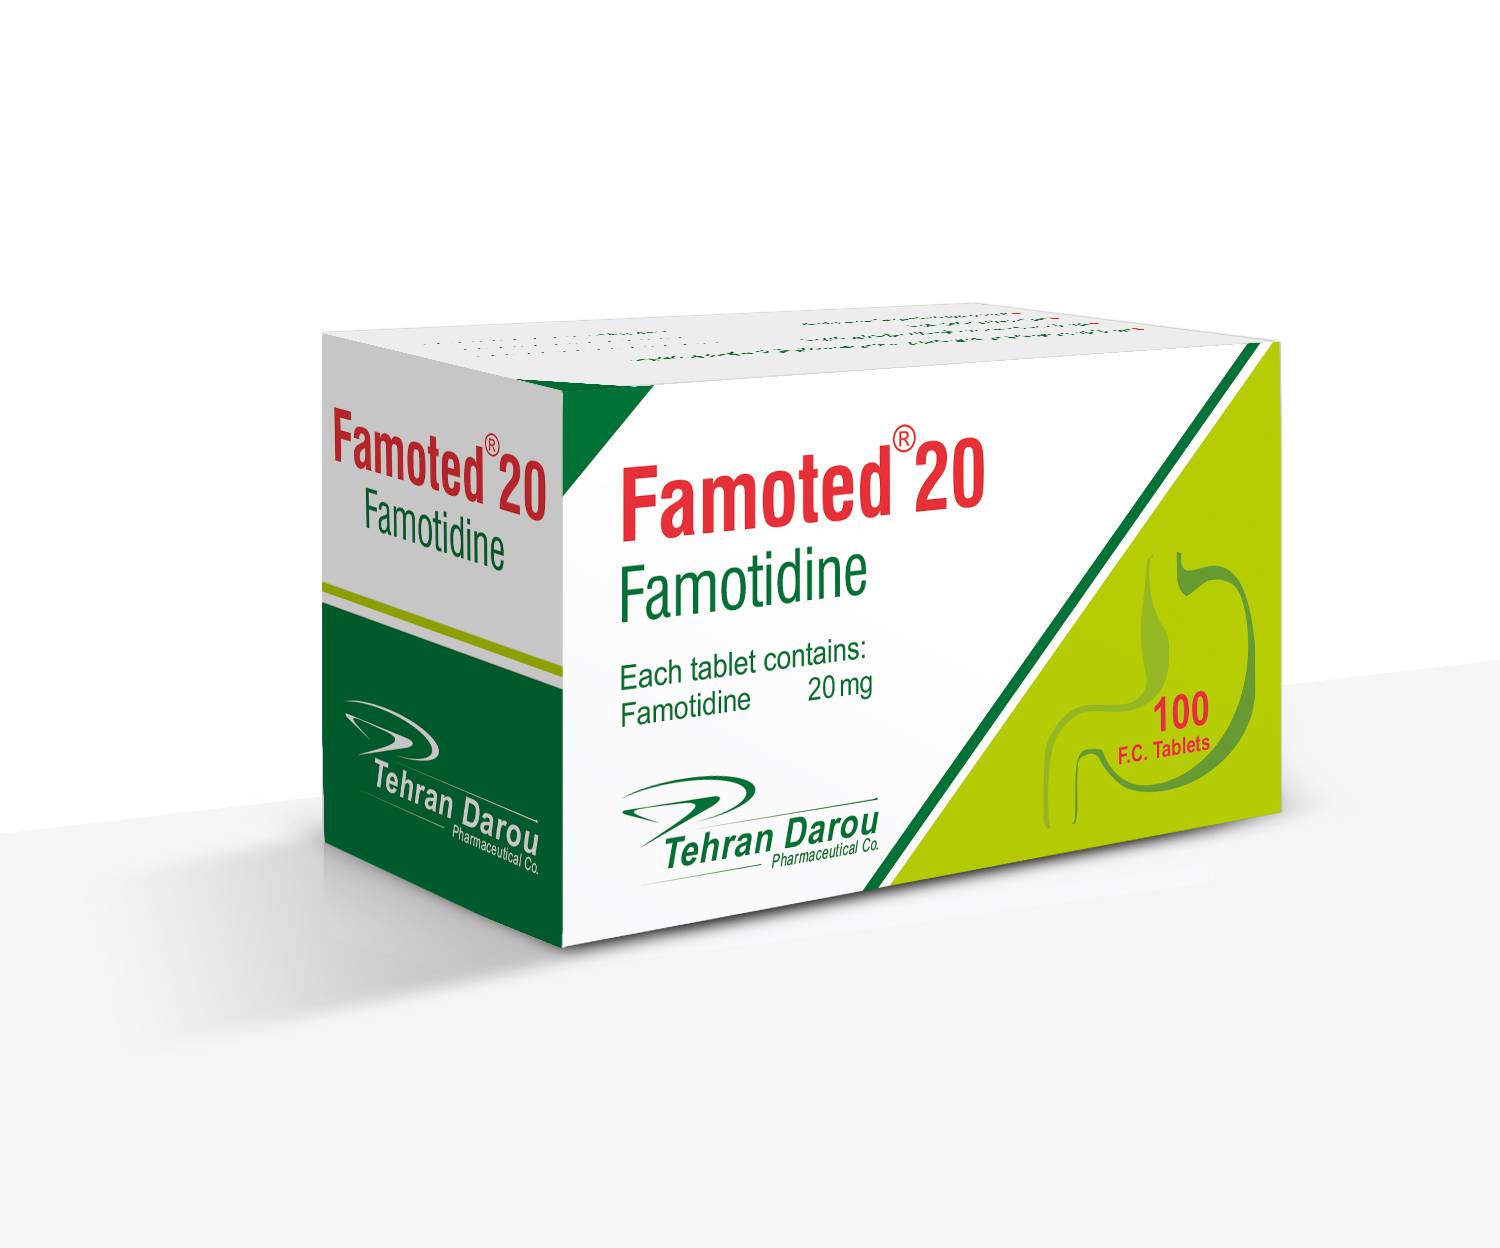 Famoted 20